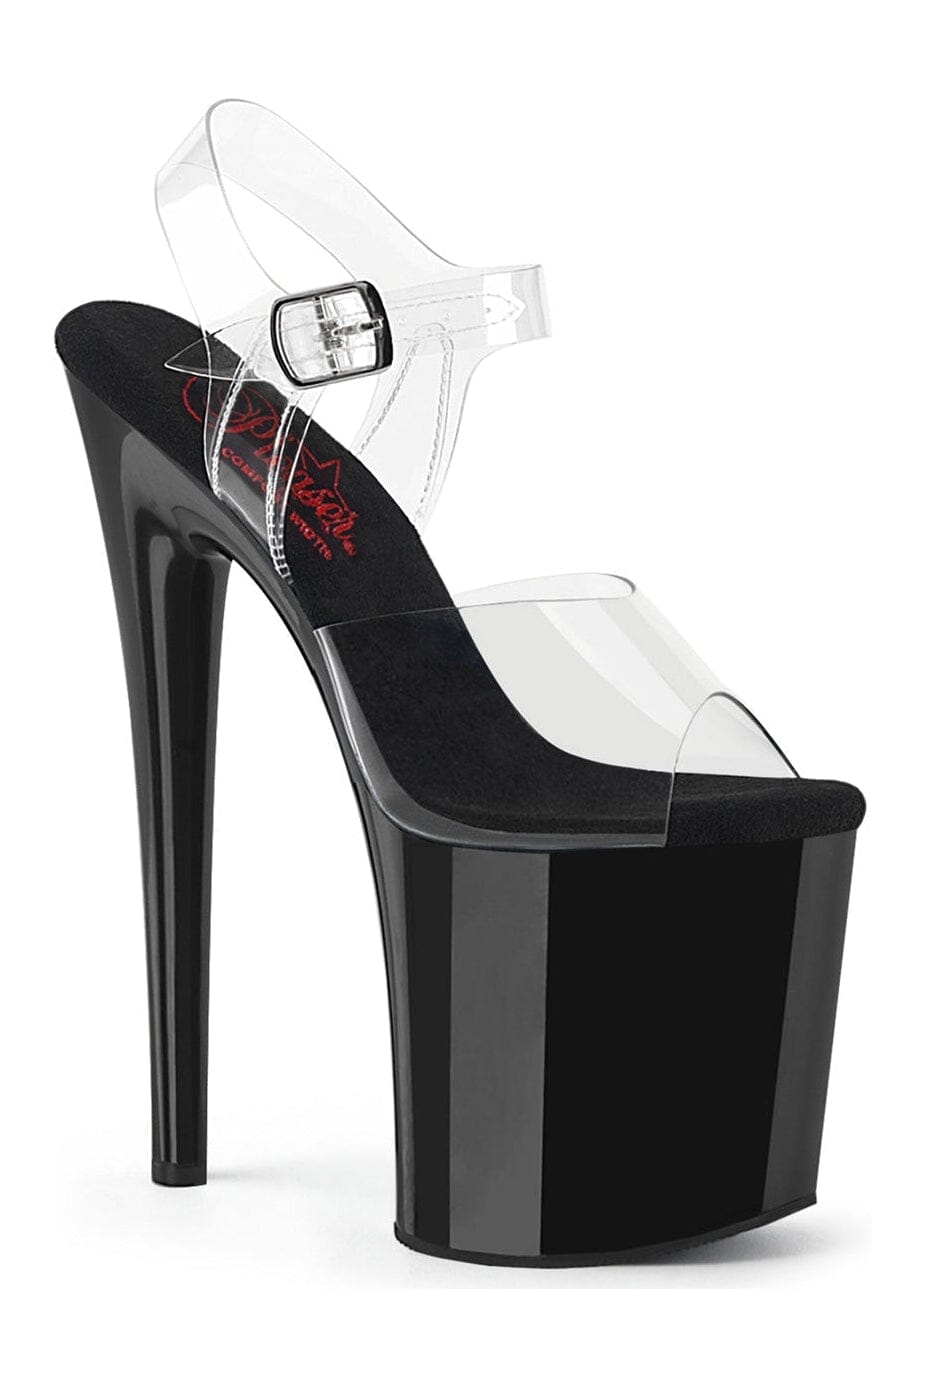 NAUGHTY-808 Clear PVC Sandal-Sandals-Pleaser-Clear-10-PVC-SEXYSHOES.COM